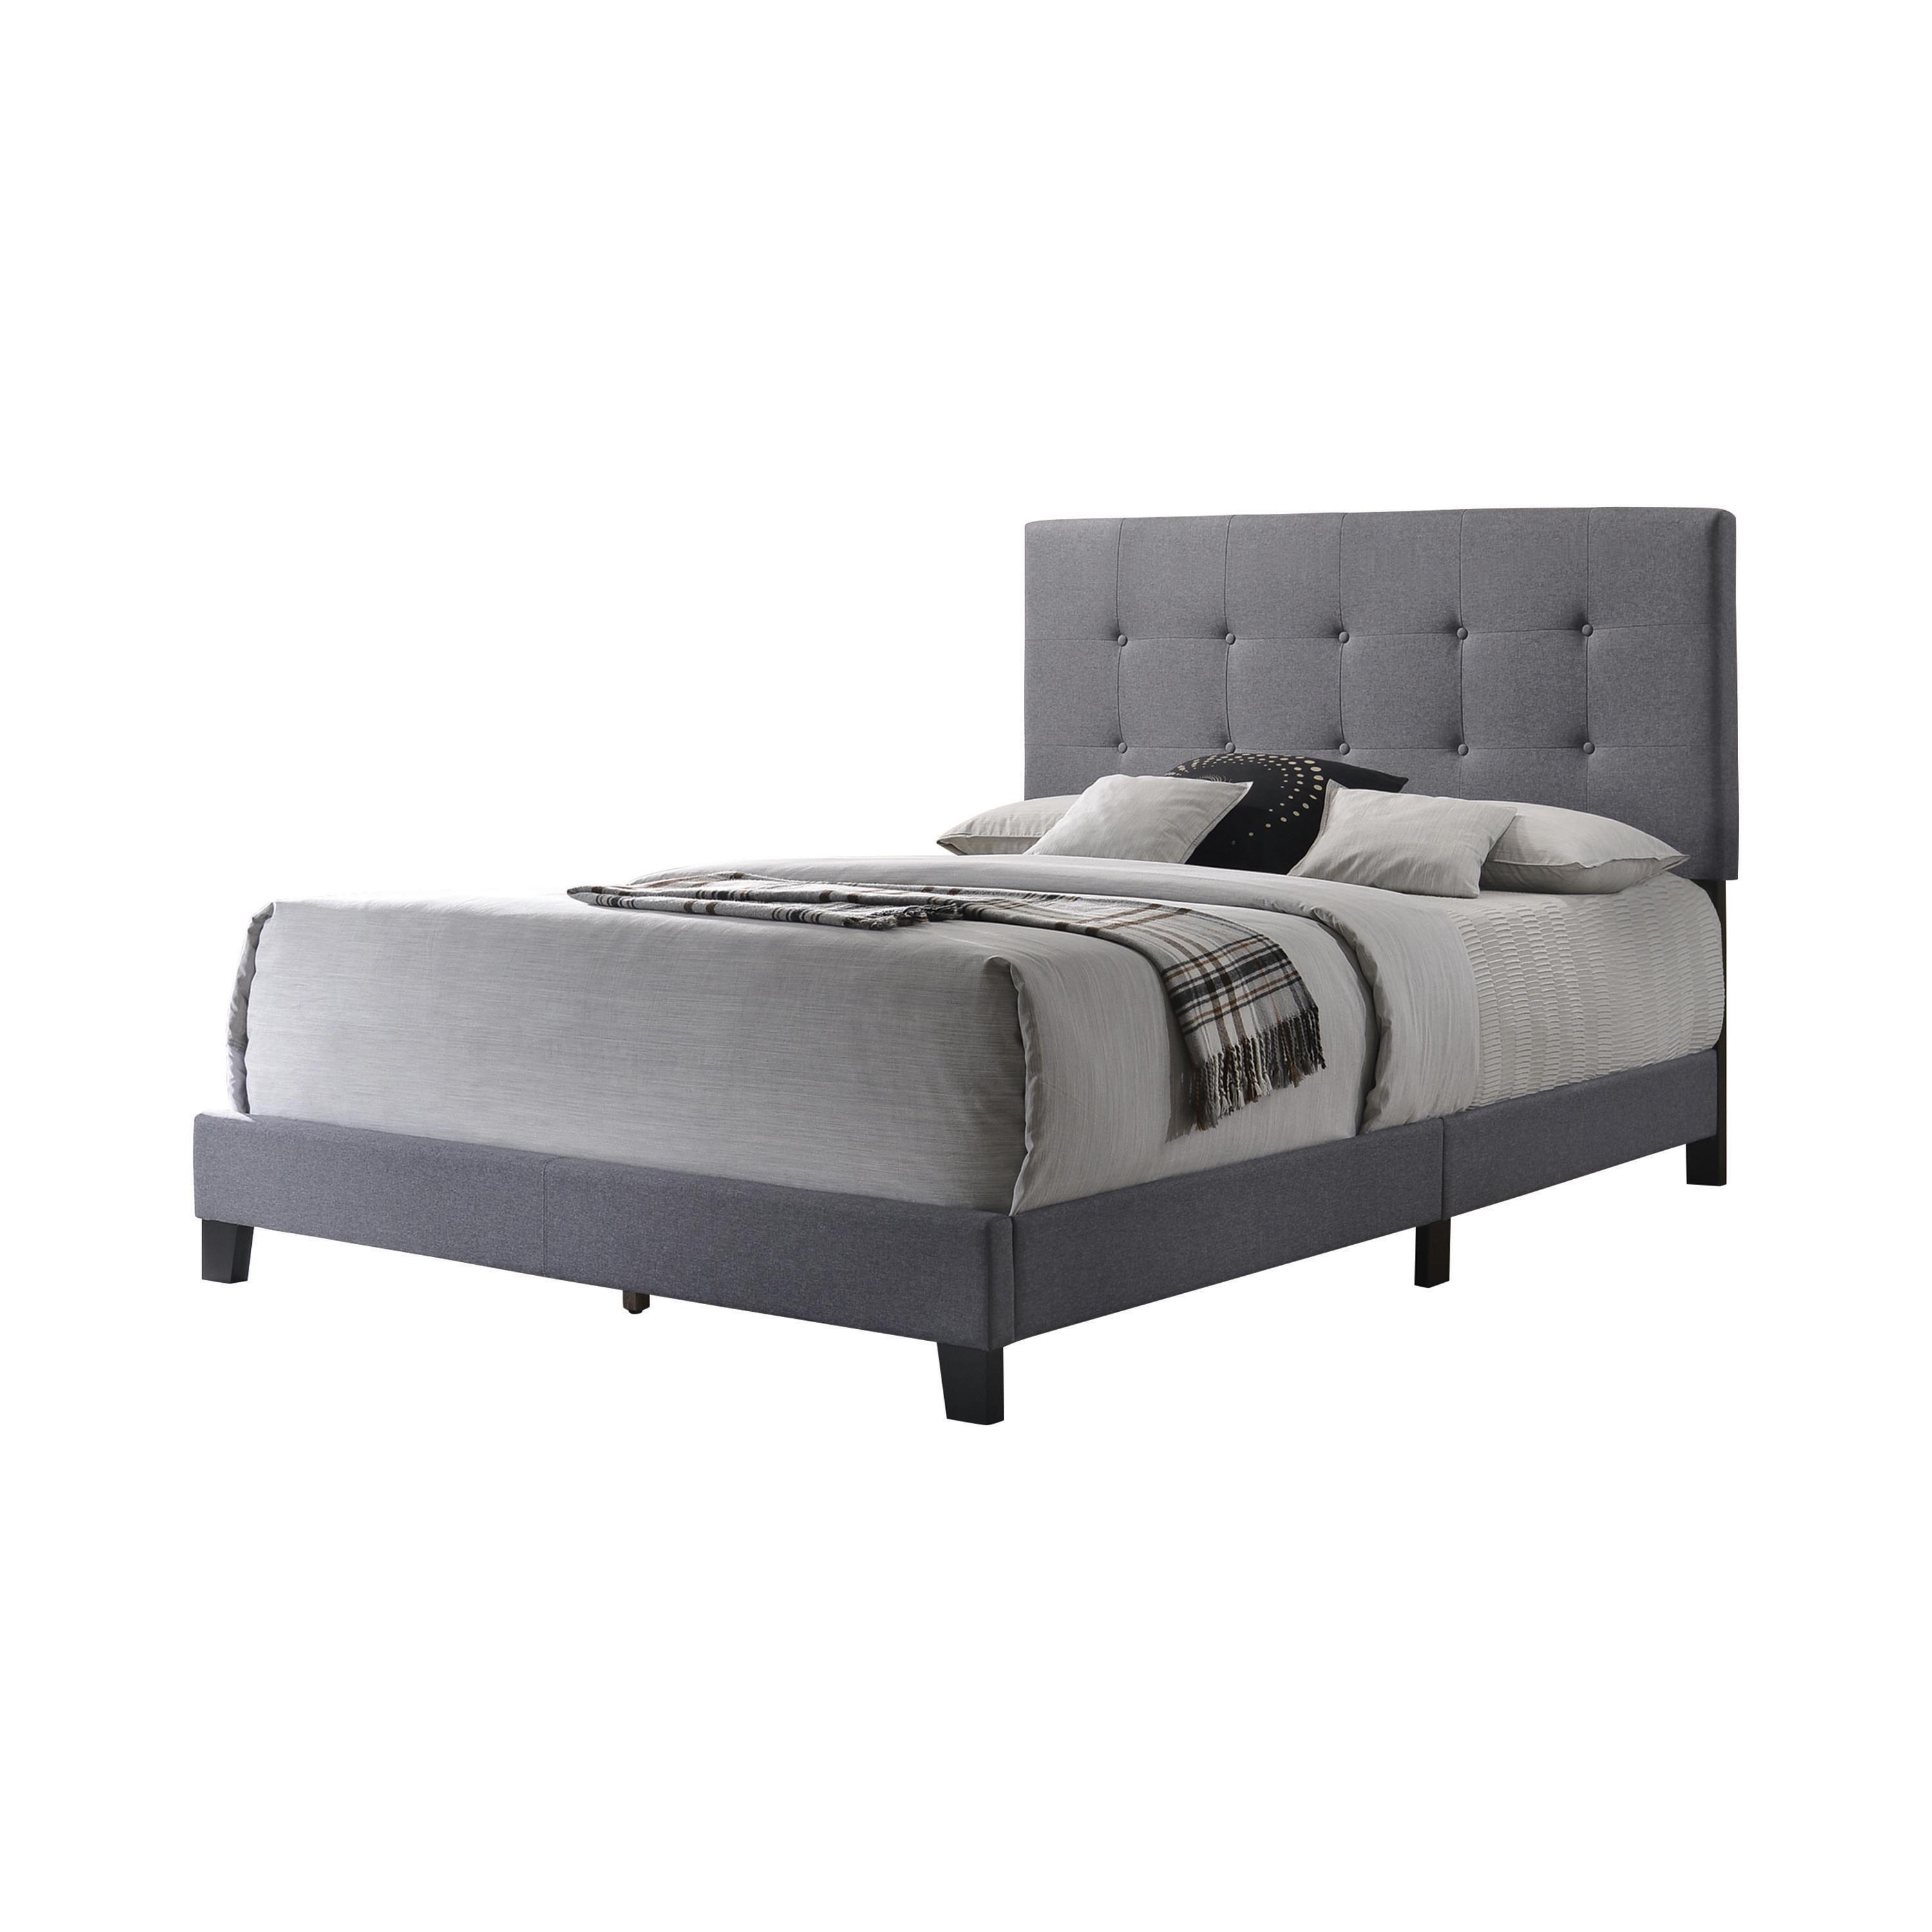 Modern Bed 305747Q Mapes 305747Q in Gray Fabric